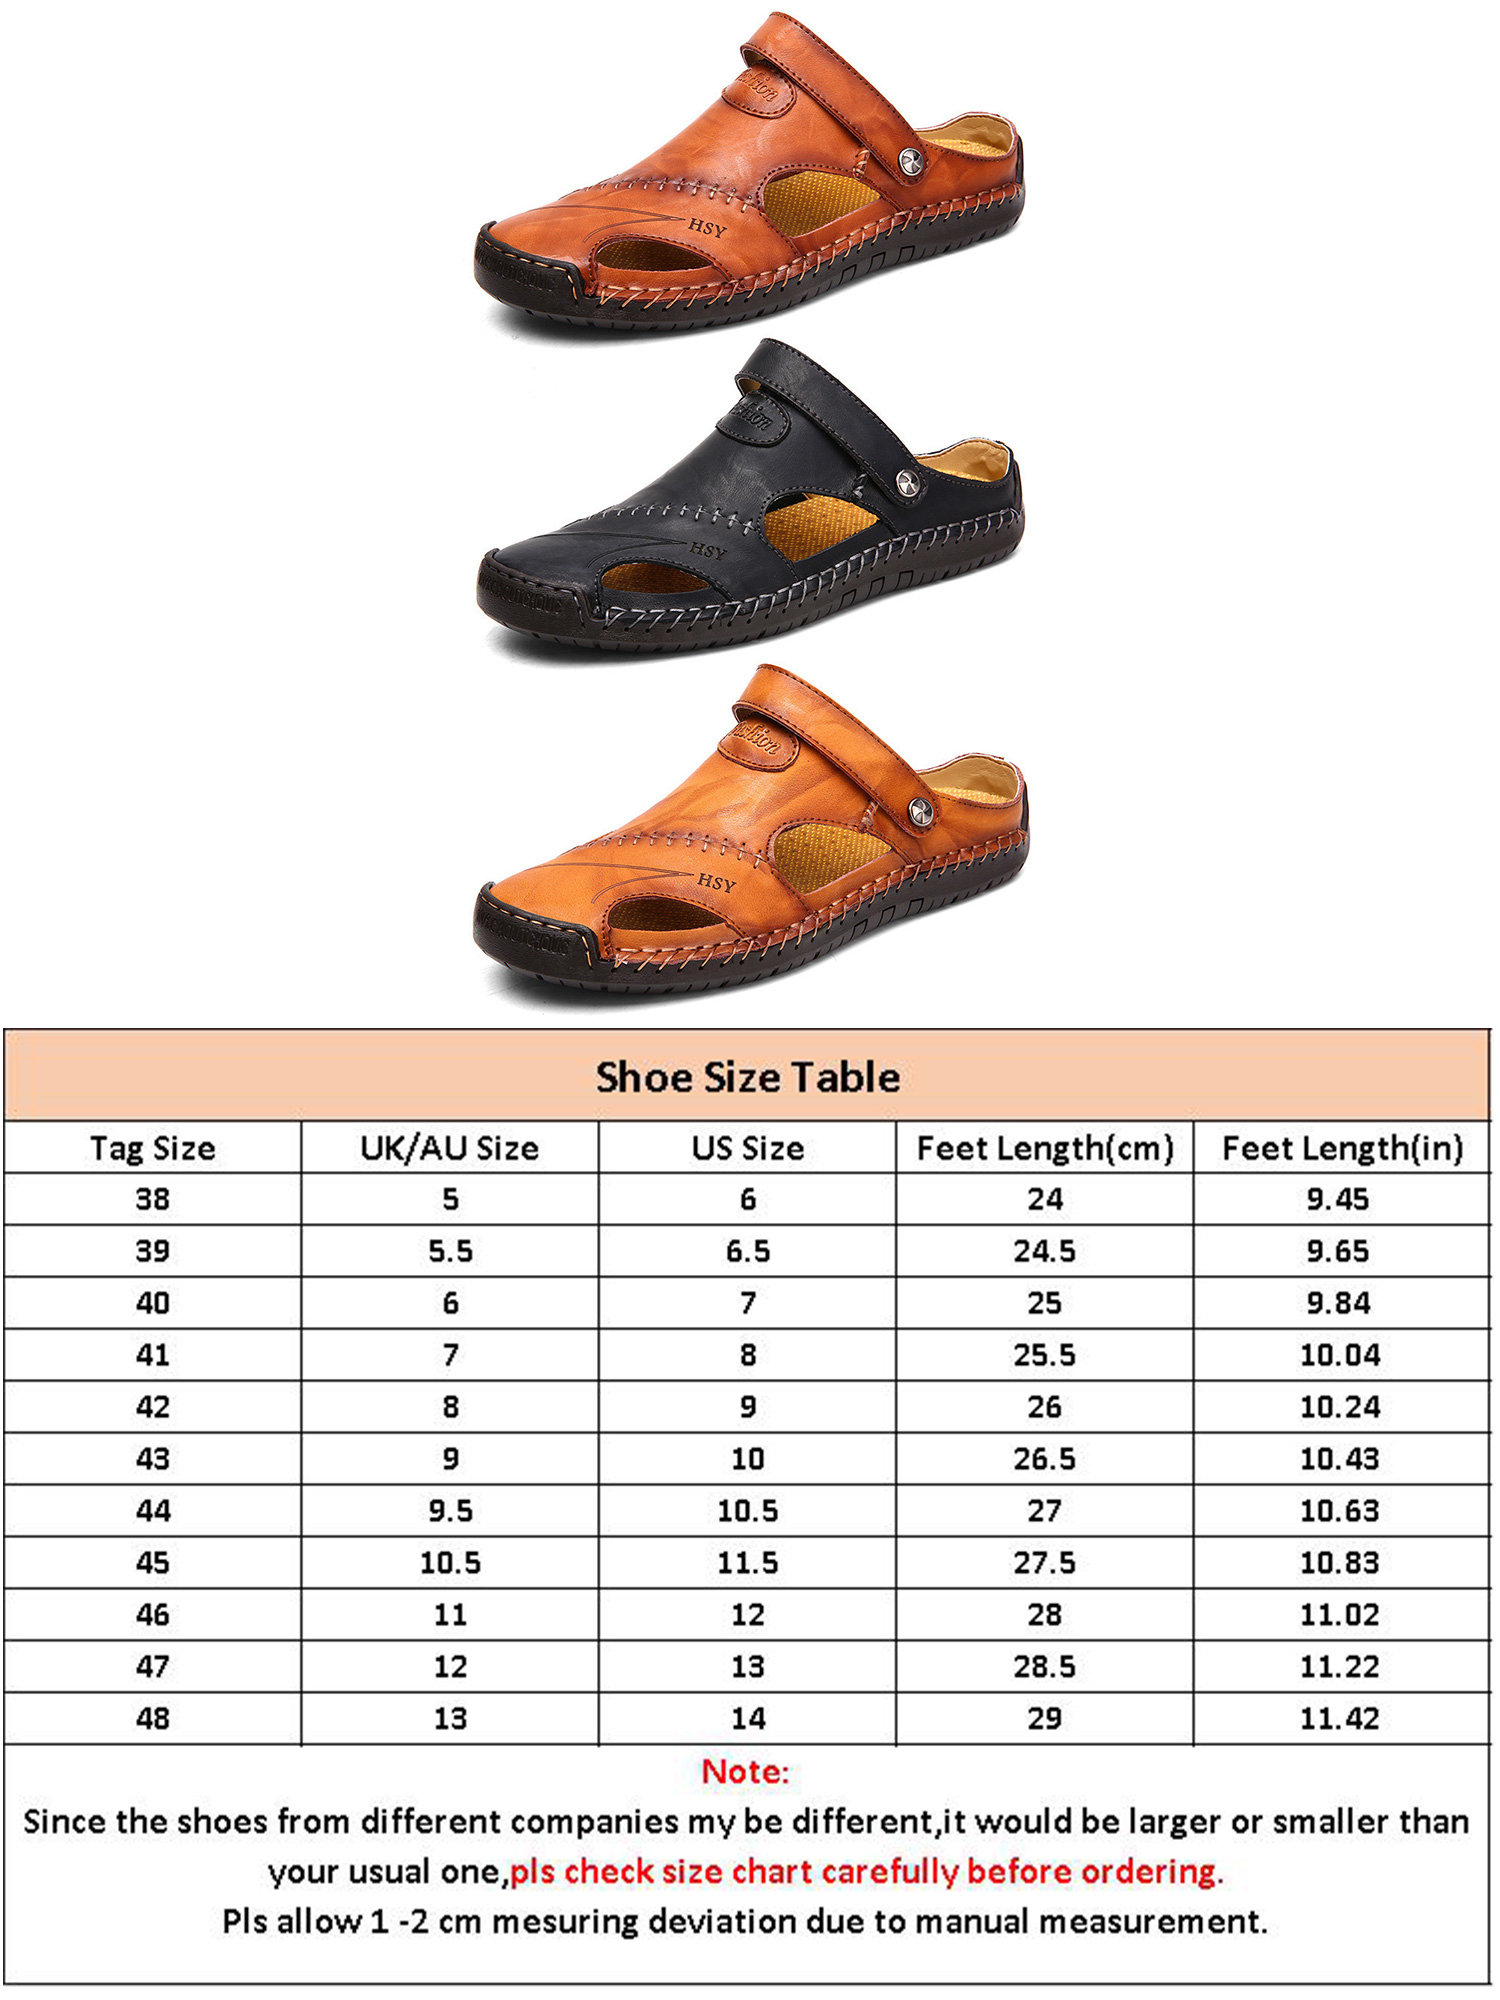 Frontwalk Mens Summer Sandals Casual Leather Shoes Outdoor Beach Breathable Casual Shoes - image 2 of 3